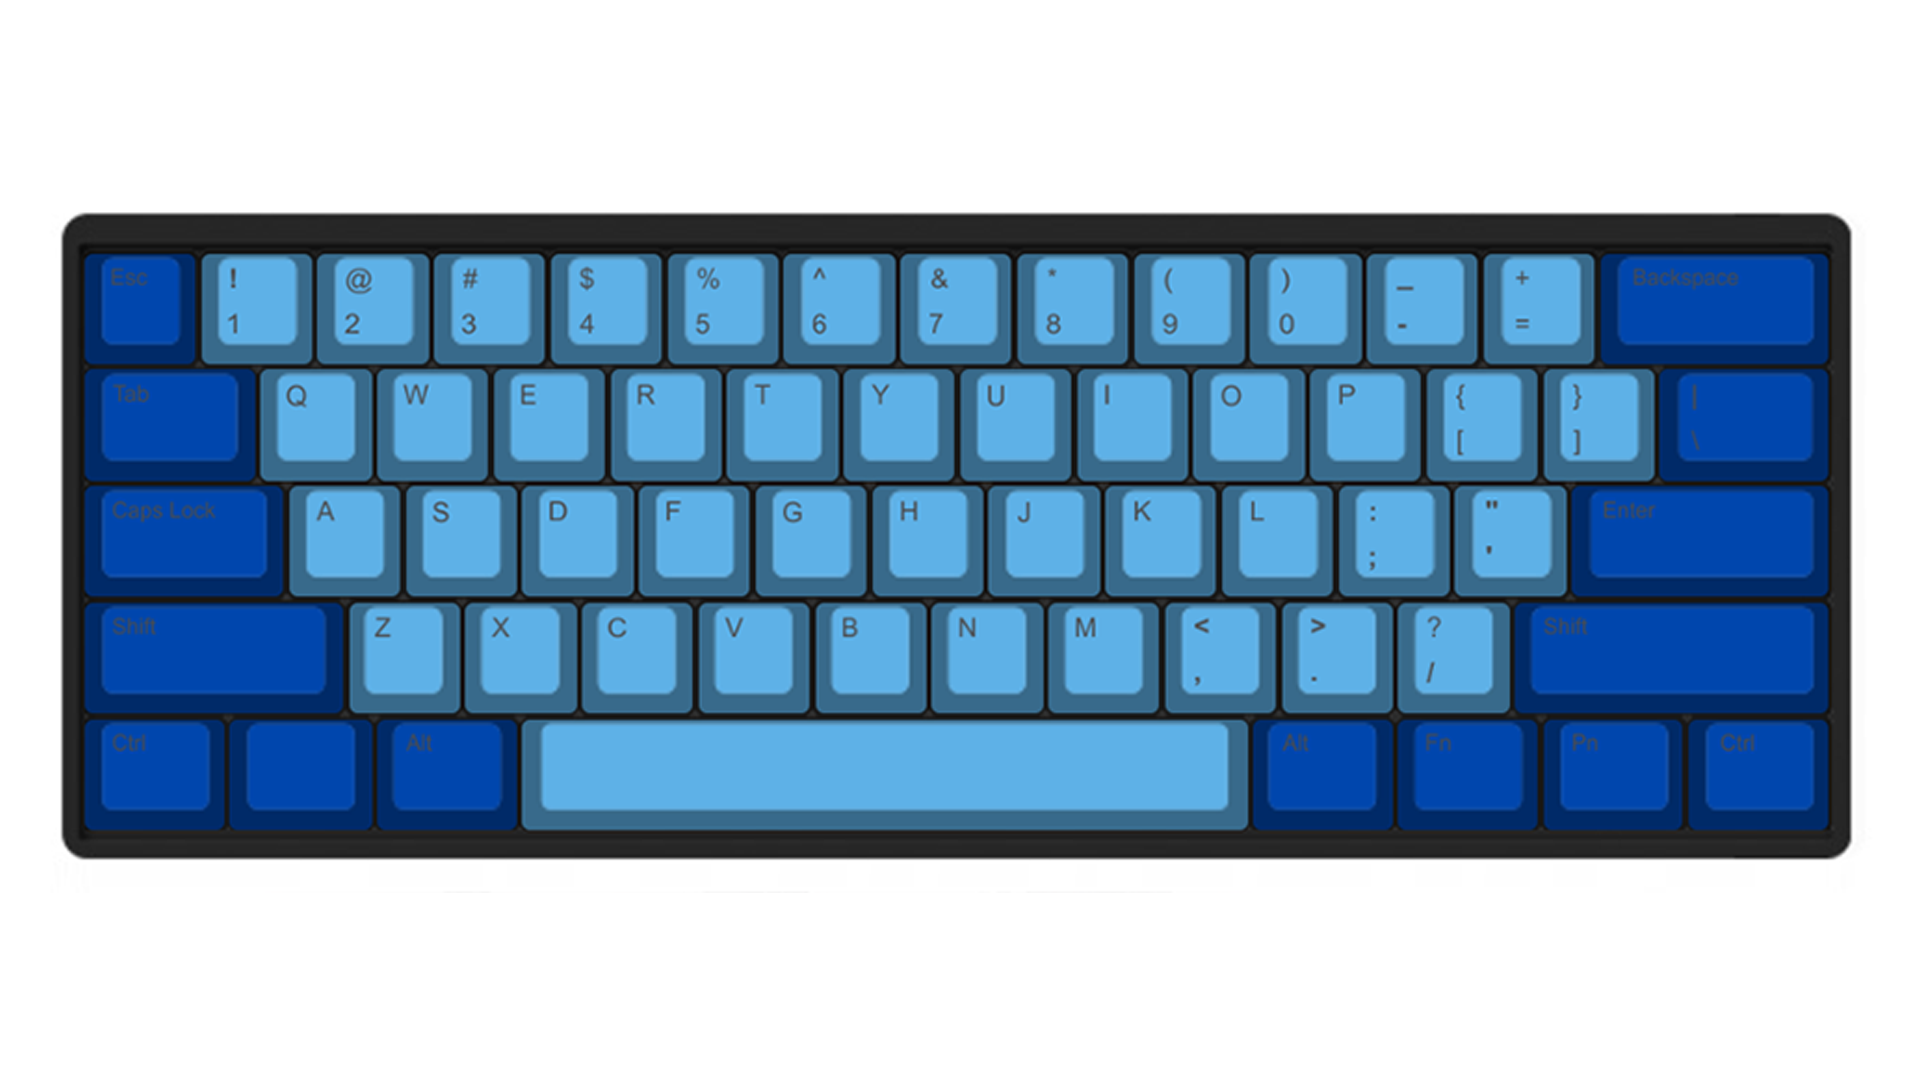 Sample dark and light blue keycaps on a mechanical keyboard